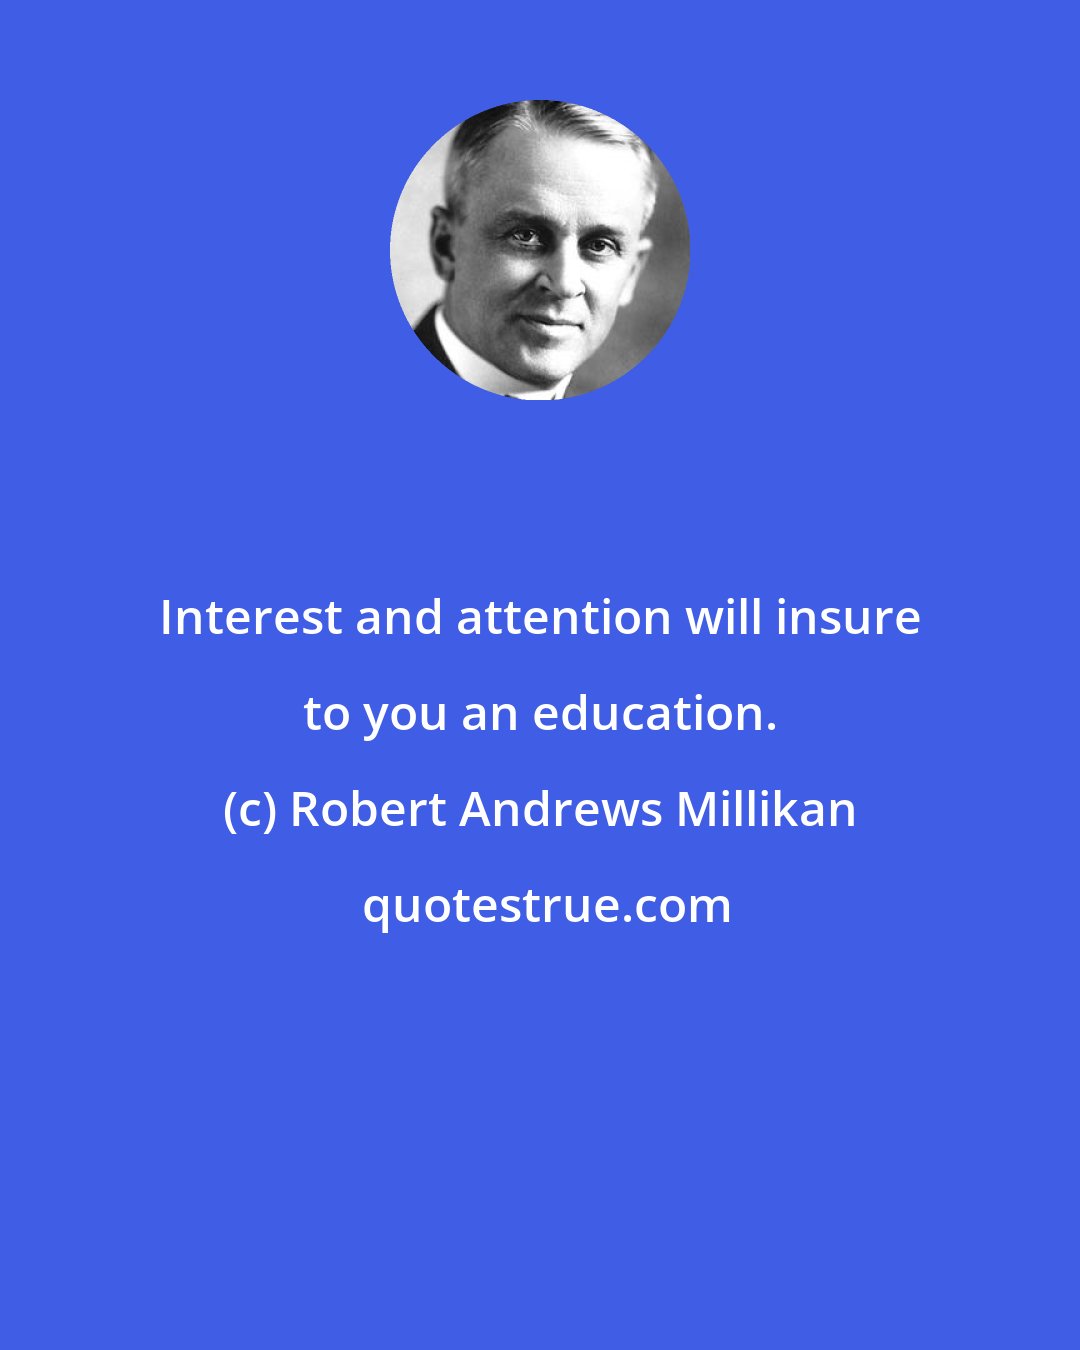 Robert Andrews Millikan: Interest and attention will insure to you an education.